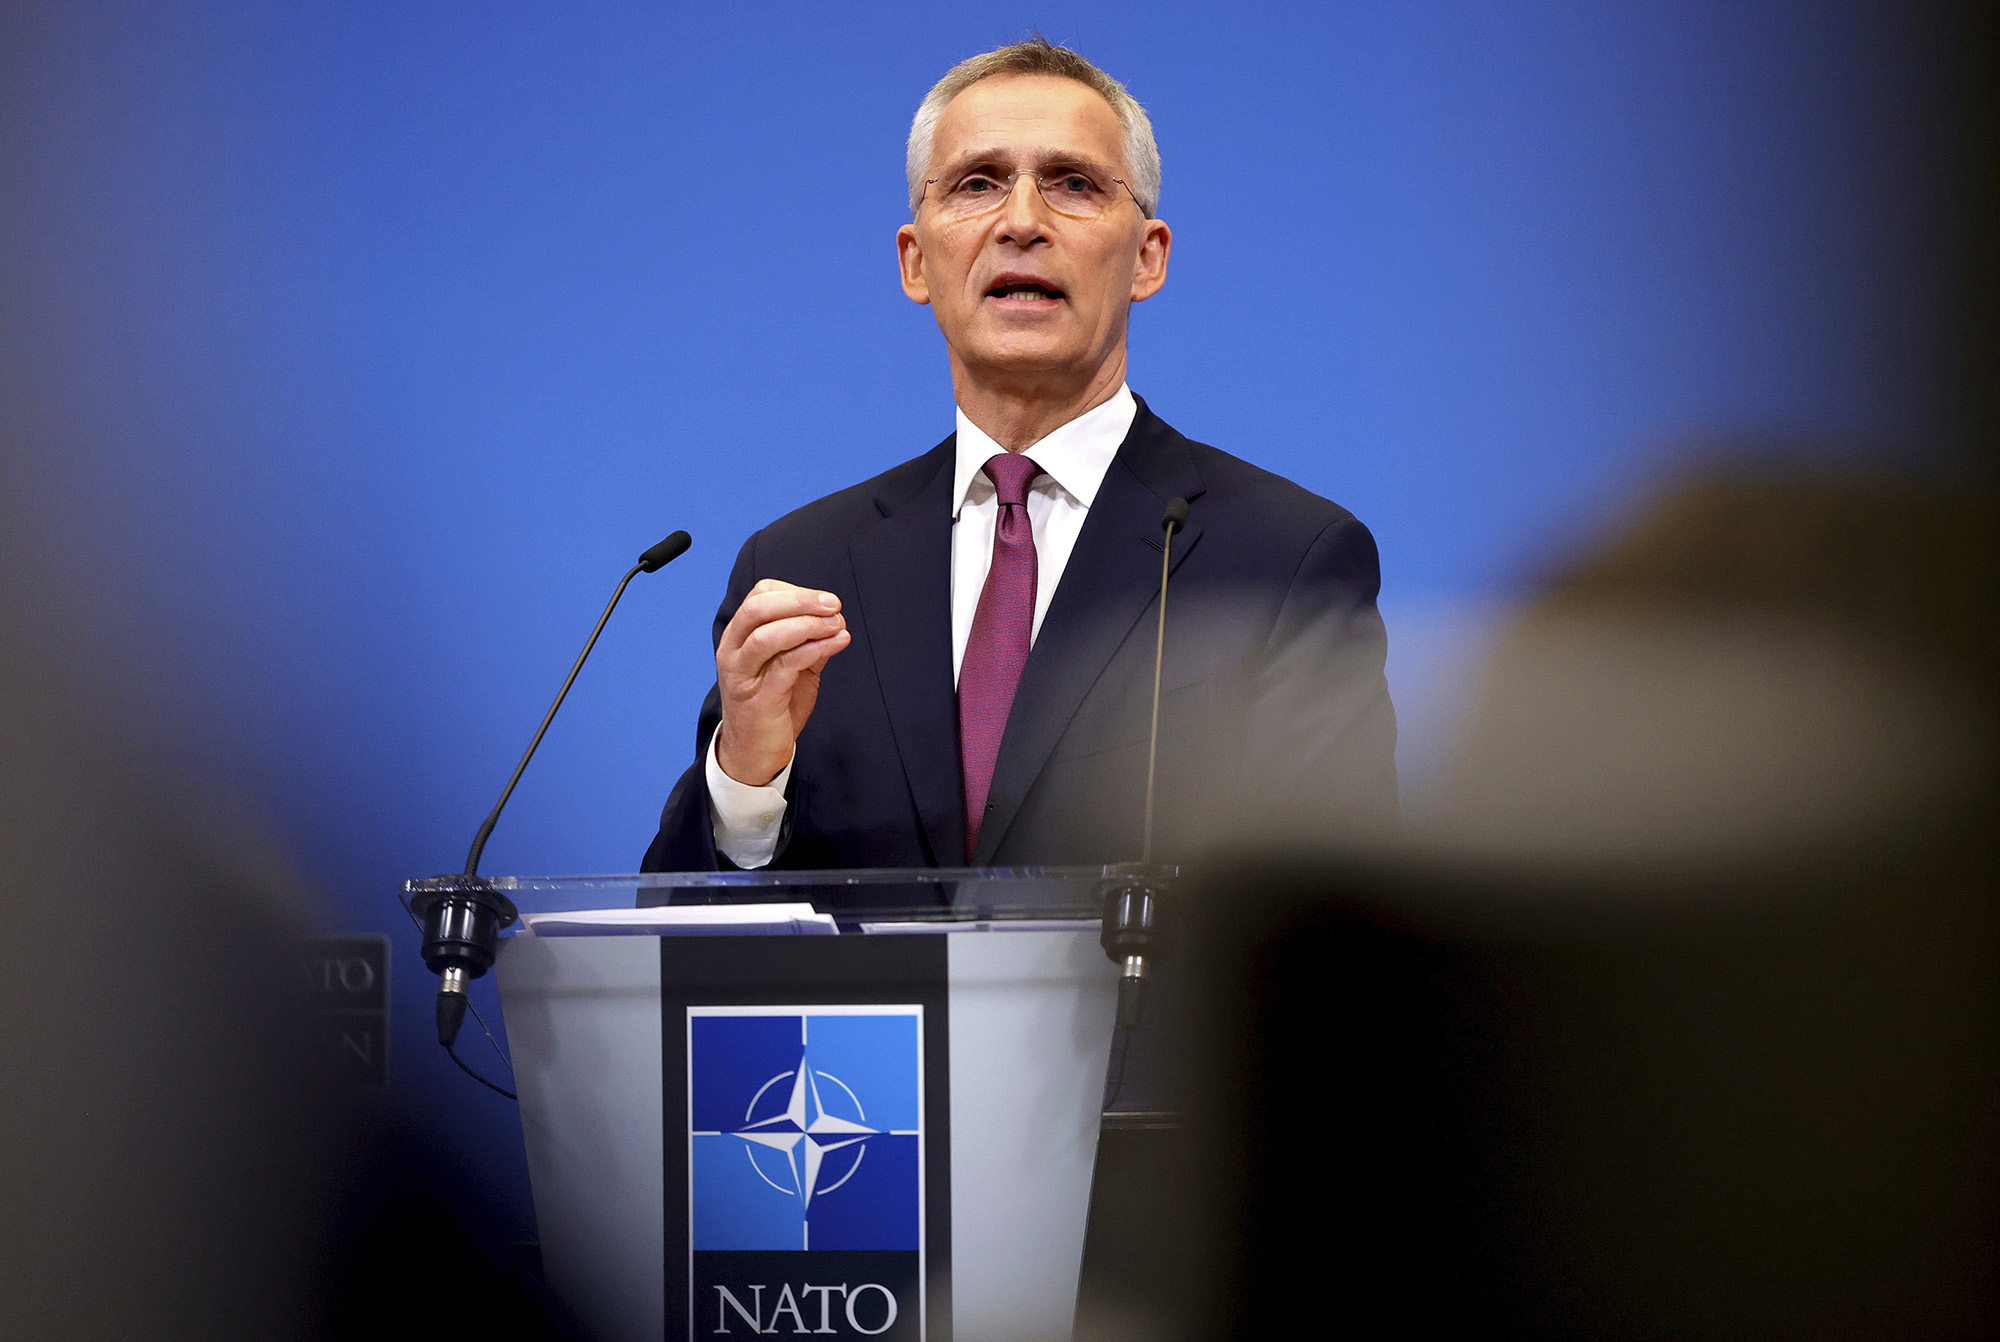 NATO Secretary General Jens Stoltenberg speaks during a media conference at NATO headquarters in Brussels, Belgium, on March 23.